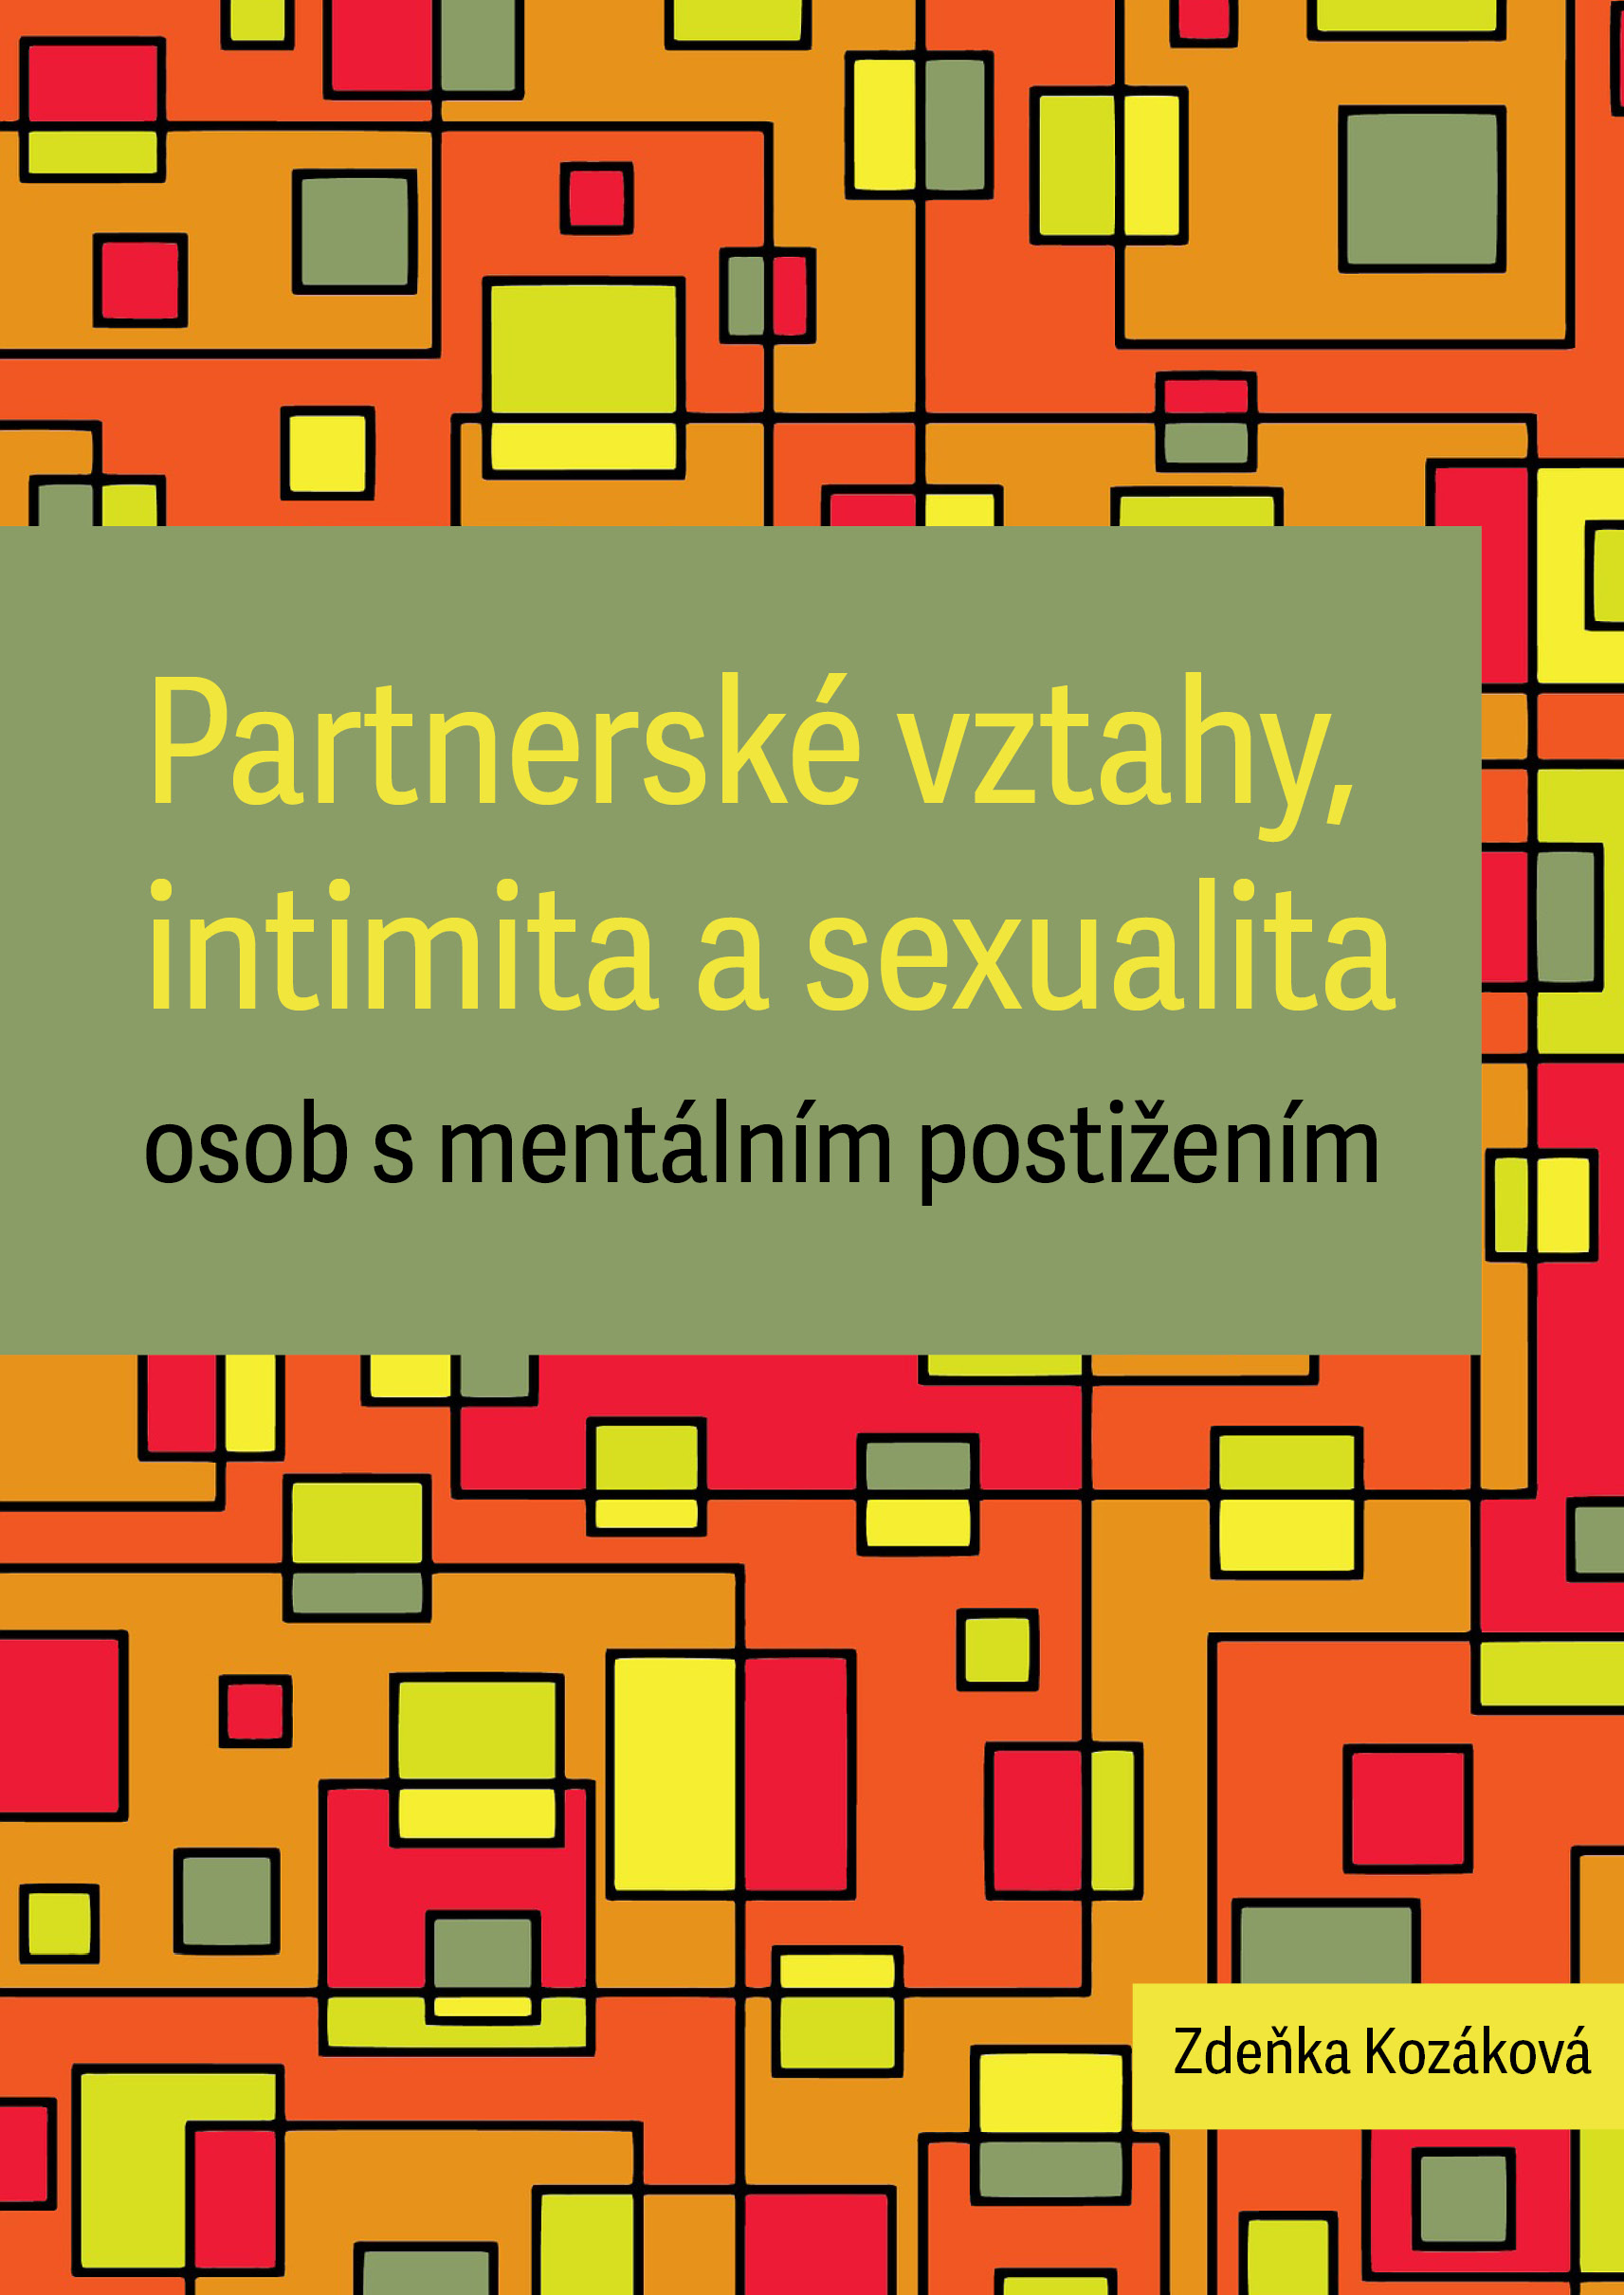 Partner relationships, intimacy and sexuality of people with intellectual disabilities